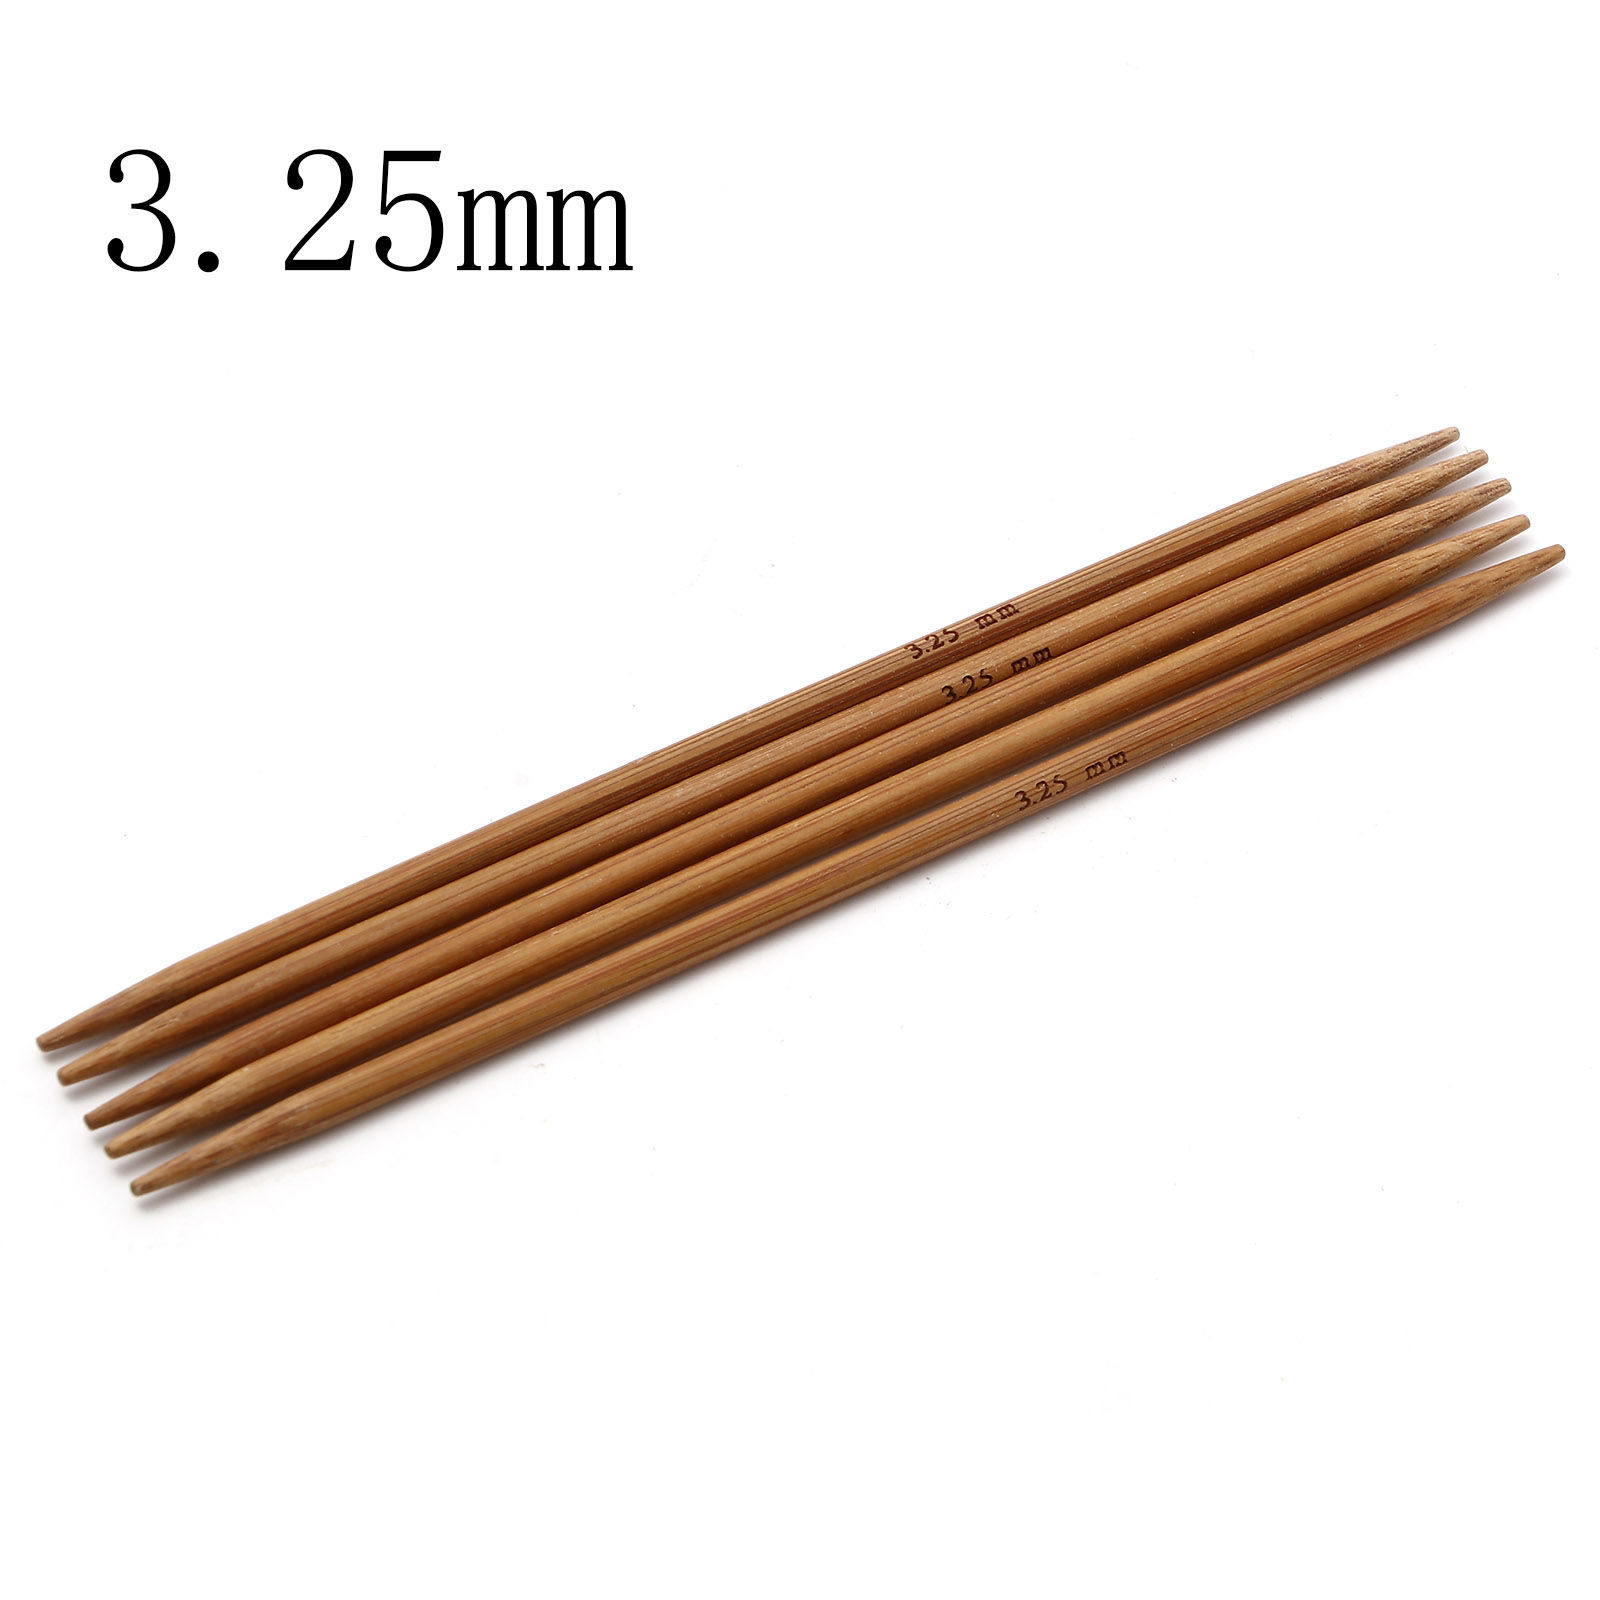 Picture of (US3 3.25mm) Bamboo Double Pointed Knitting Needles Brown 13cm(5 1/8") long, 5 PCs